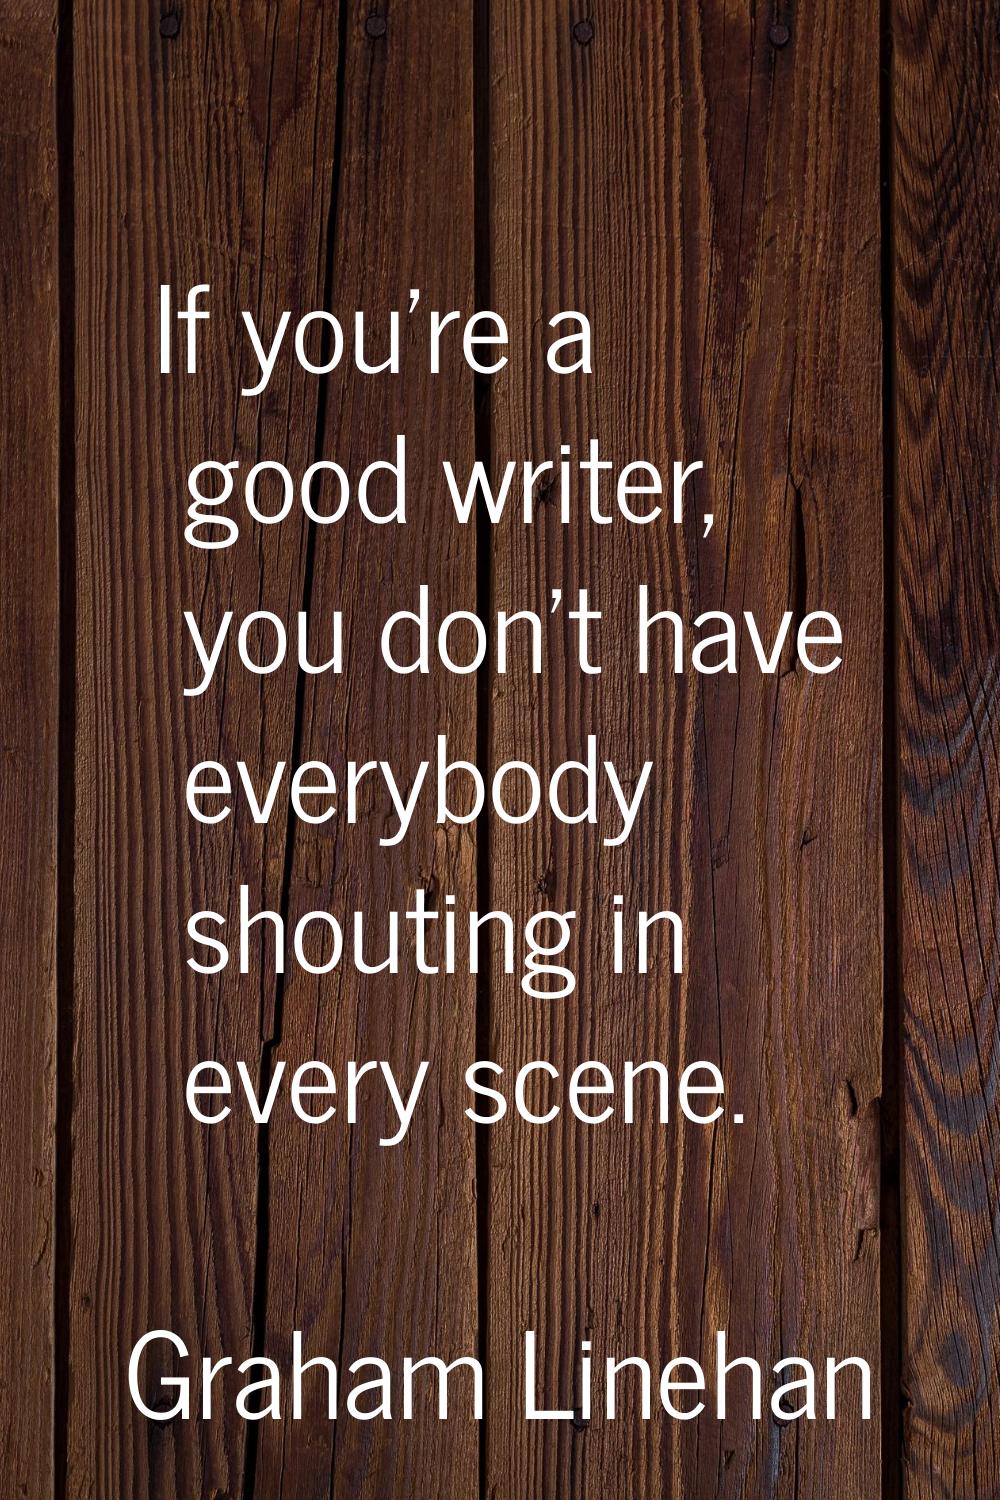 If you're a good writer, you don't have everybody shouting in every scene.